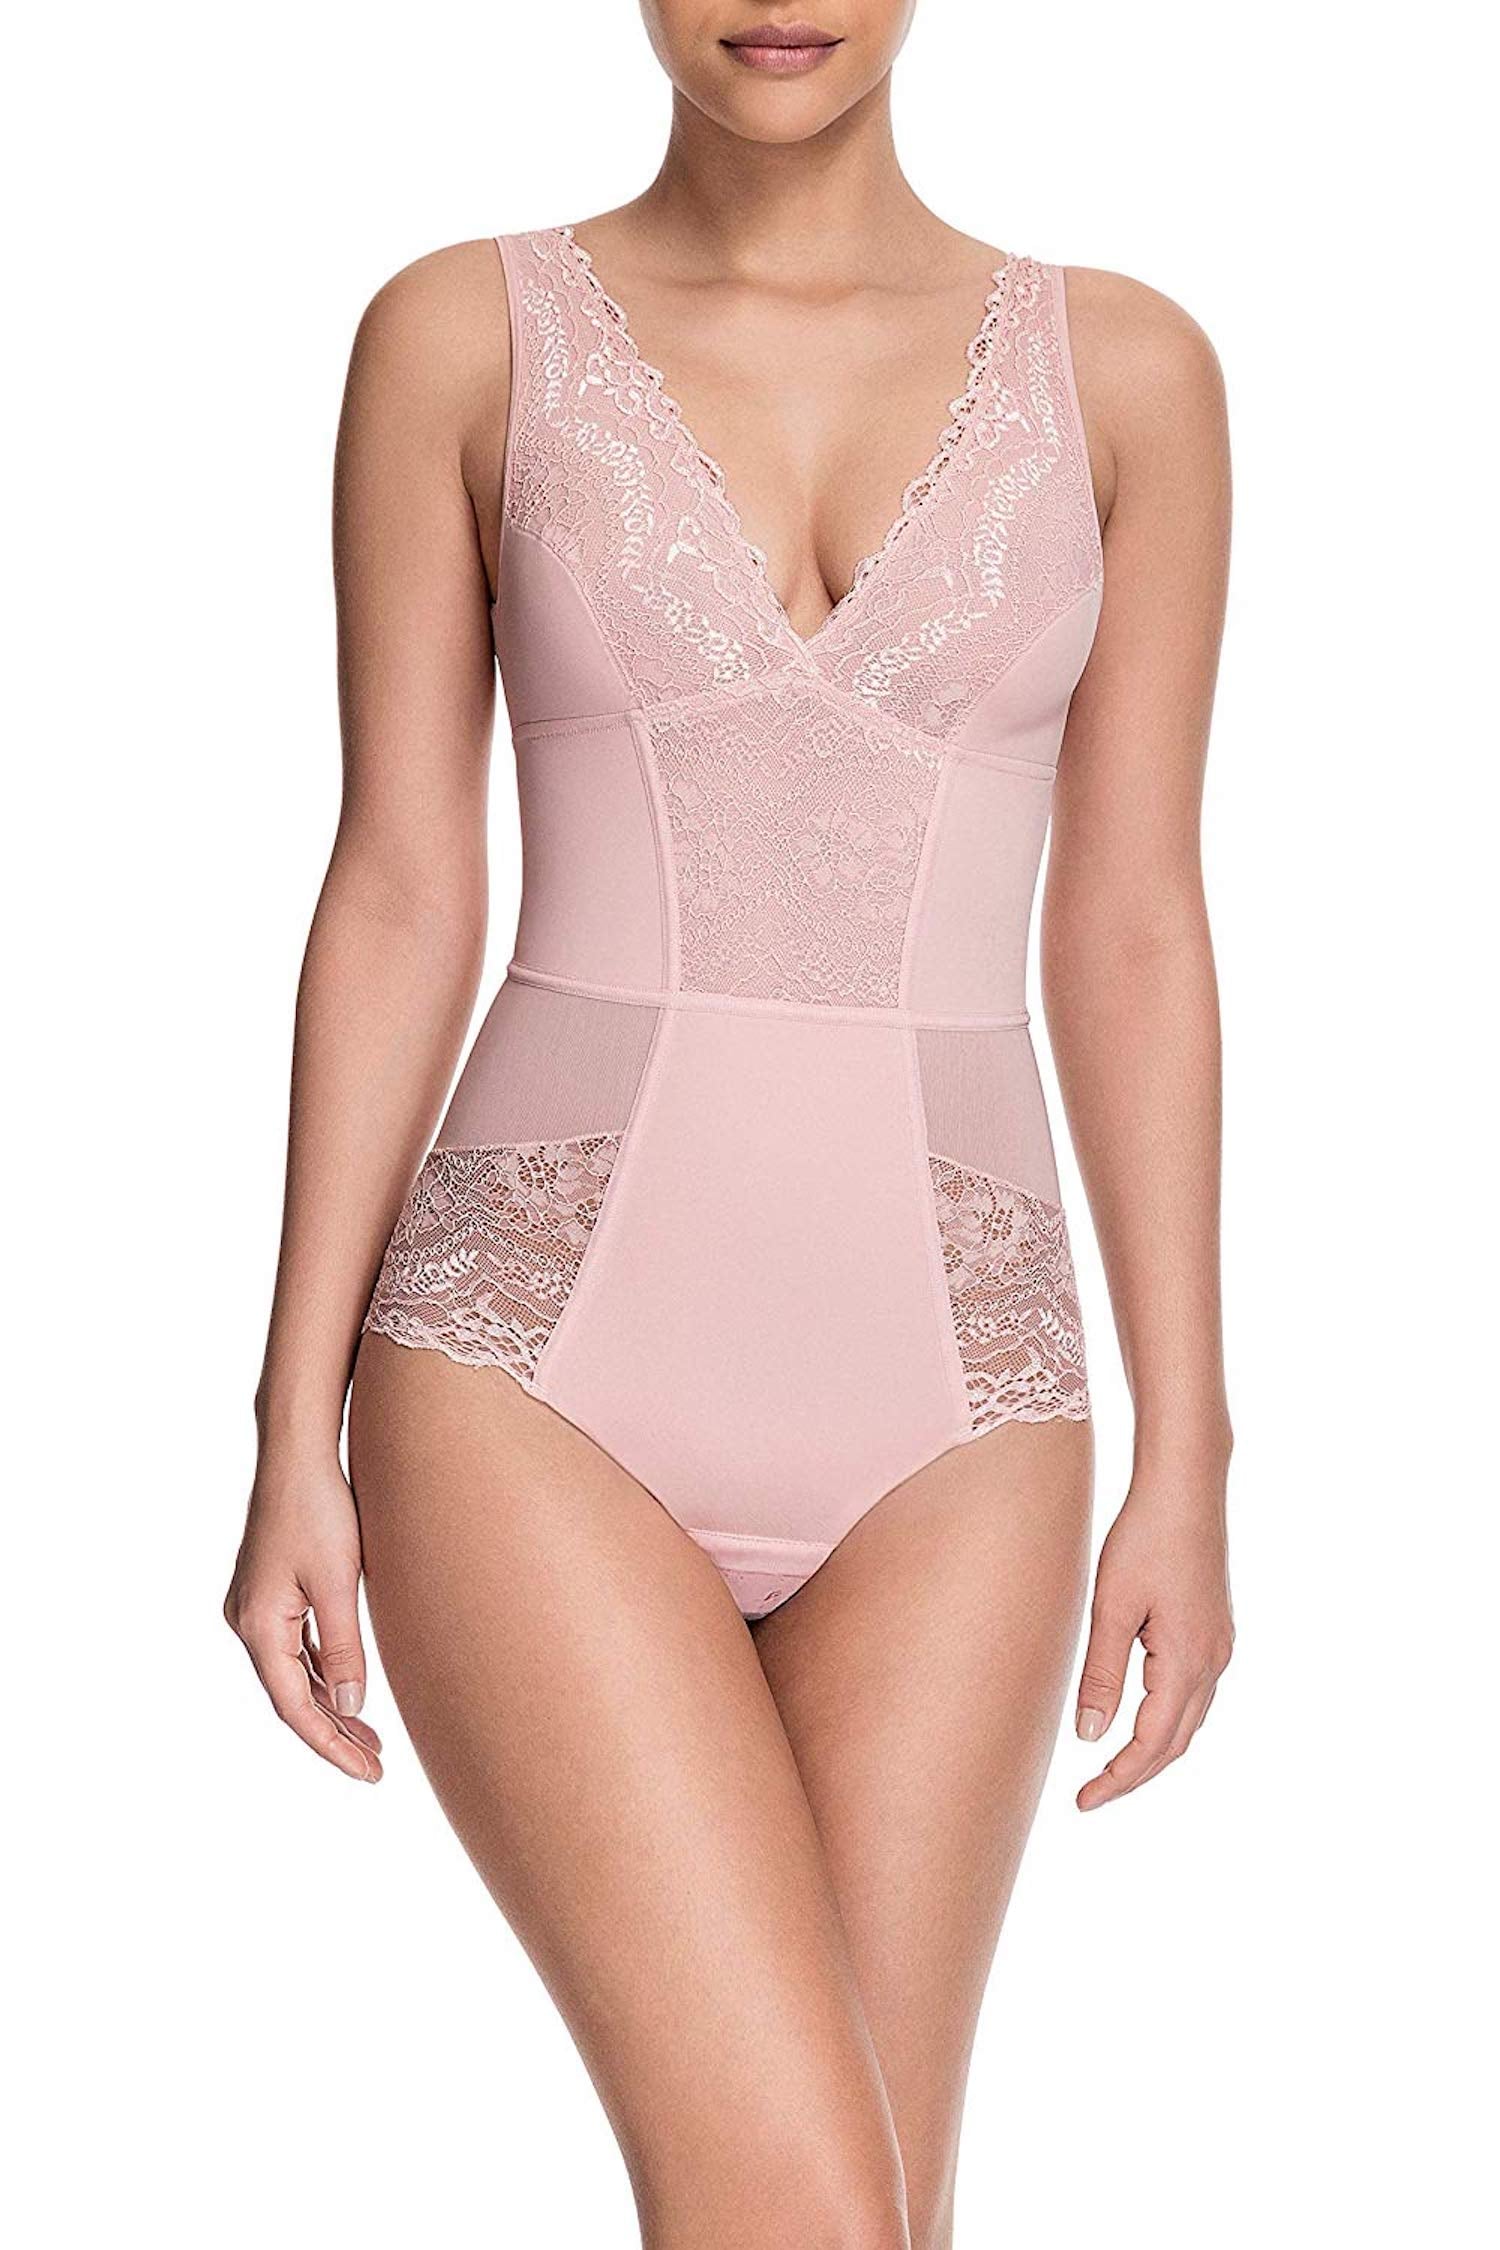 Bali Lace 'N Smooth Firm Control Bodysuit - Women's